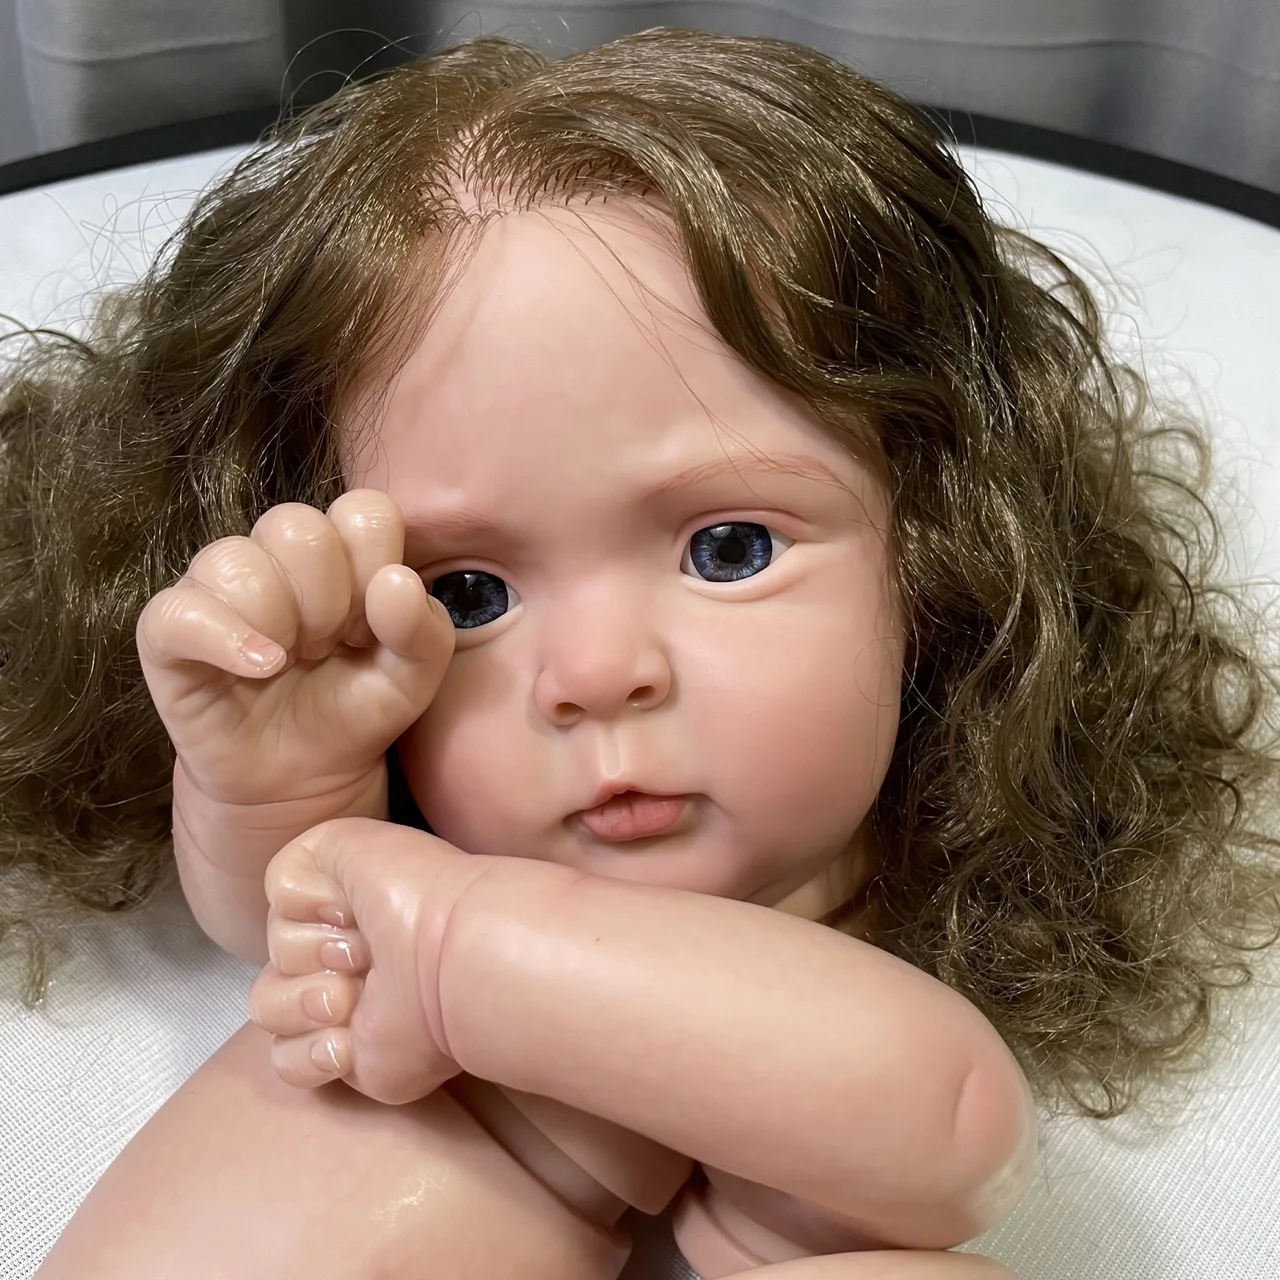 

20Inches Unassembled Painted Reborn Doll Jocy With Hair Transplant Handmade High Quality Unfinished Doll Parts With Cloth Body